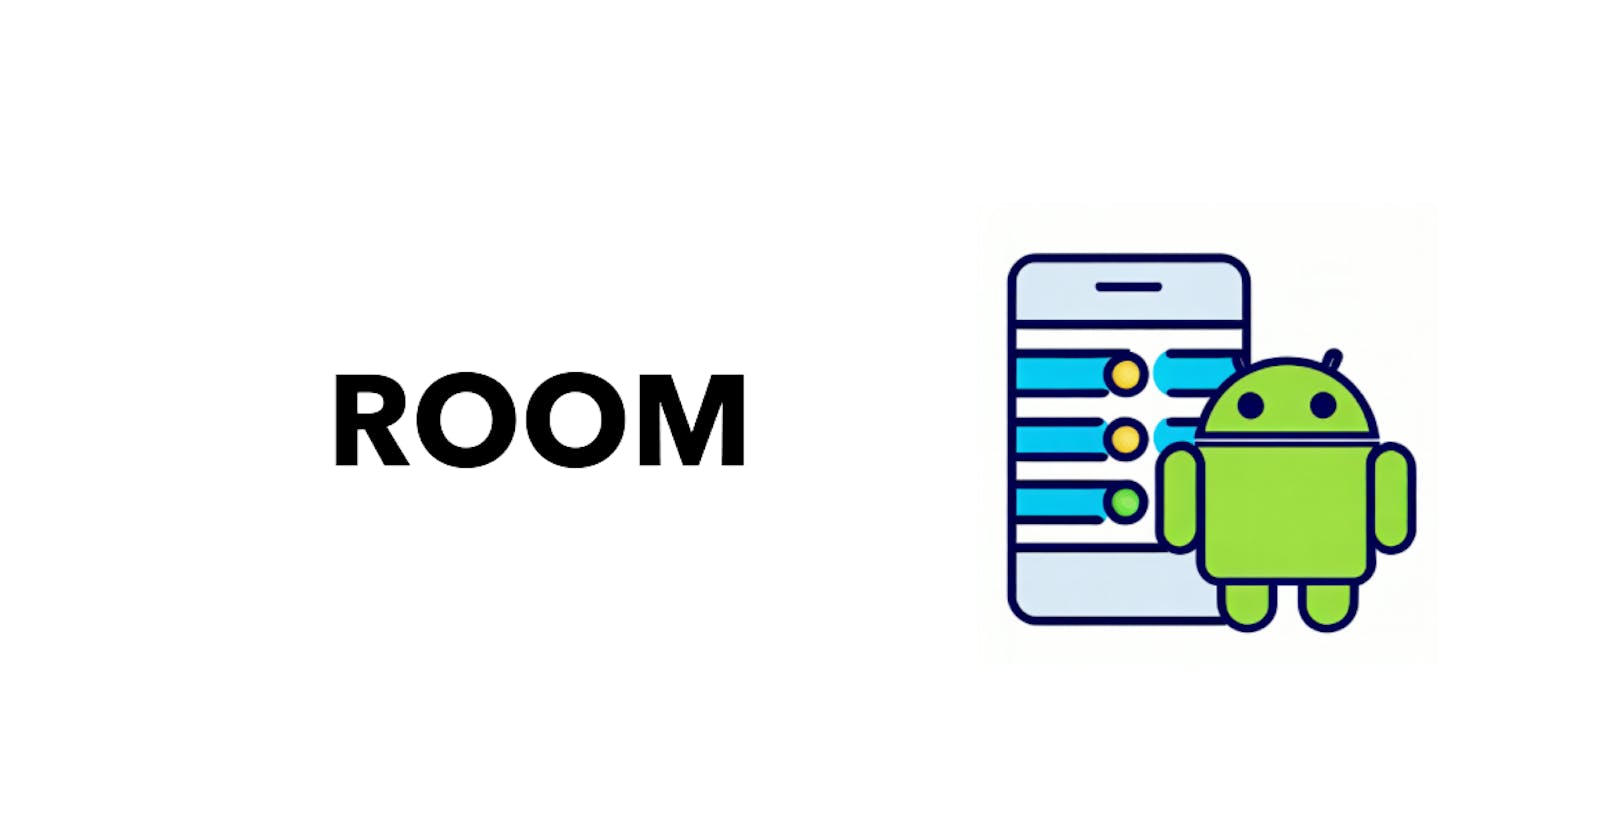 Storing data in Android with Room